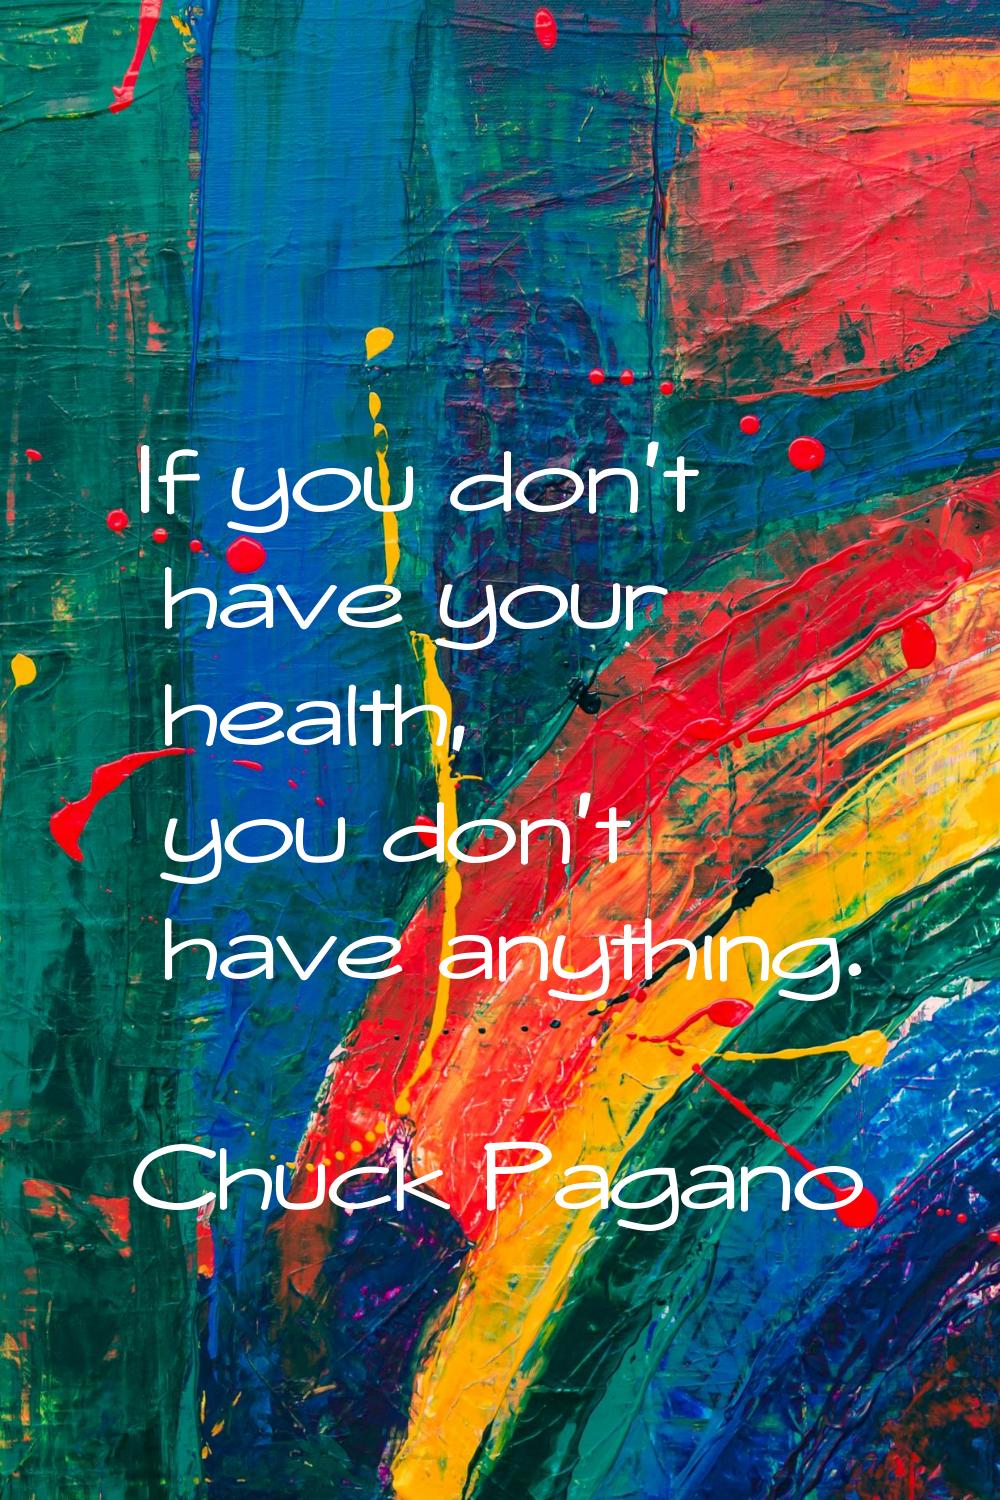 If you don't have your health, you don't have anything.